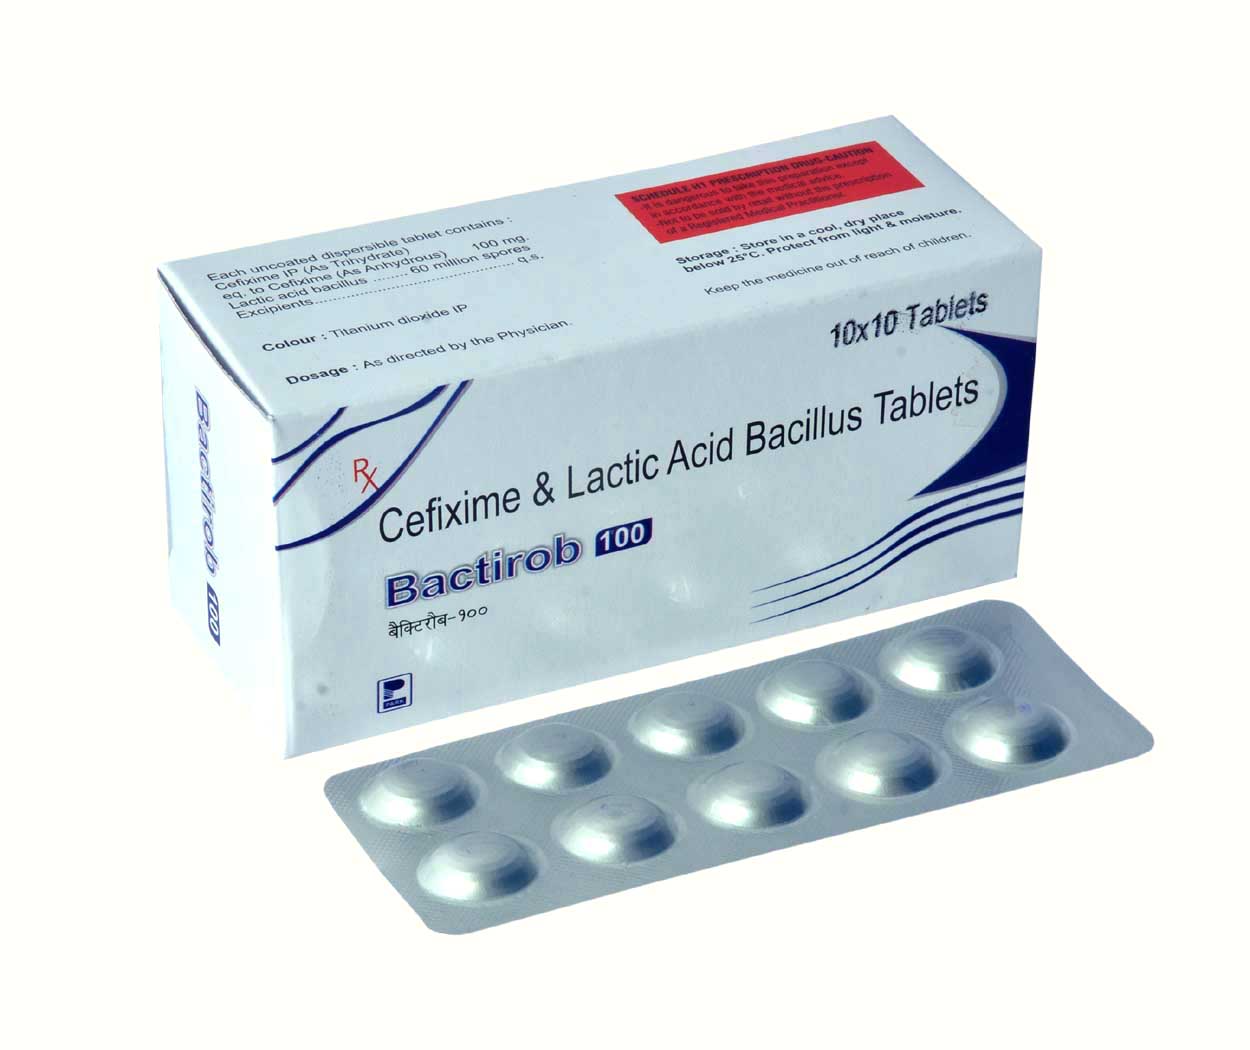 Product Name: Bactirob 100, Compositions of Bactirob 100 are Cefixime & Lactic Acid Bacillus Tablets - Park Pharmaceuticals